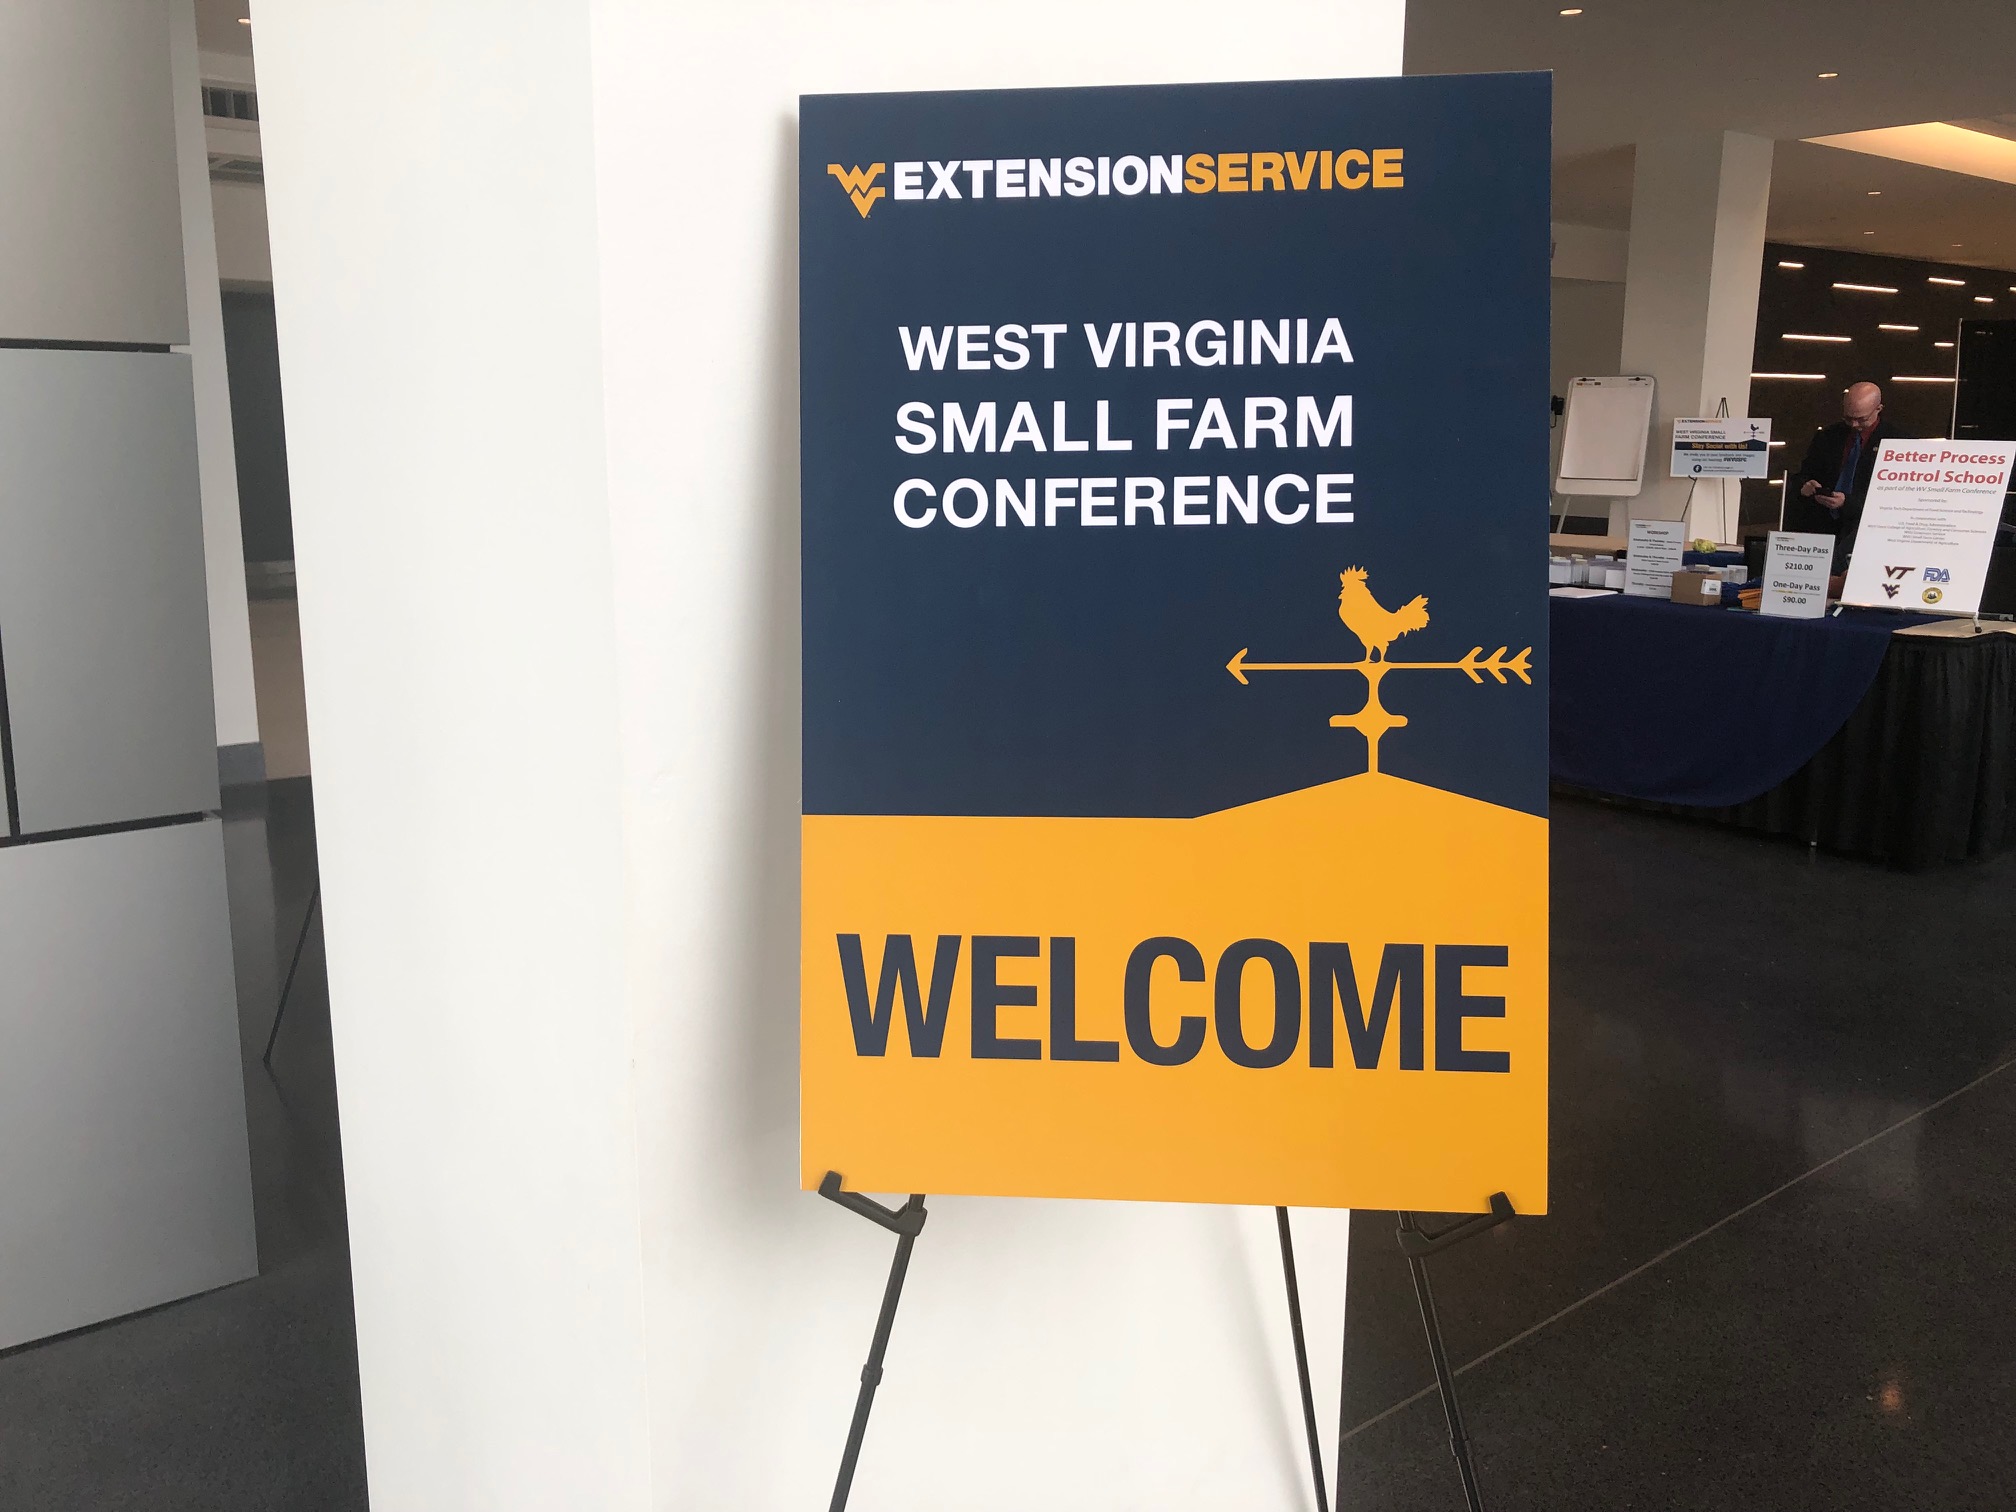 West Virginia Small Farm Conference underway in Charleston WV MetroNews